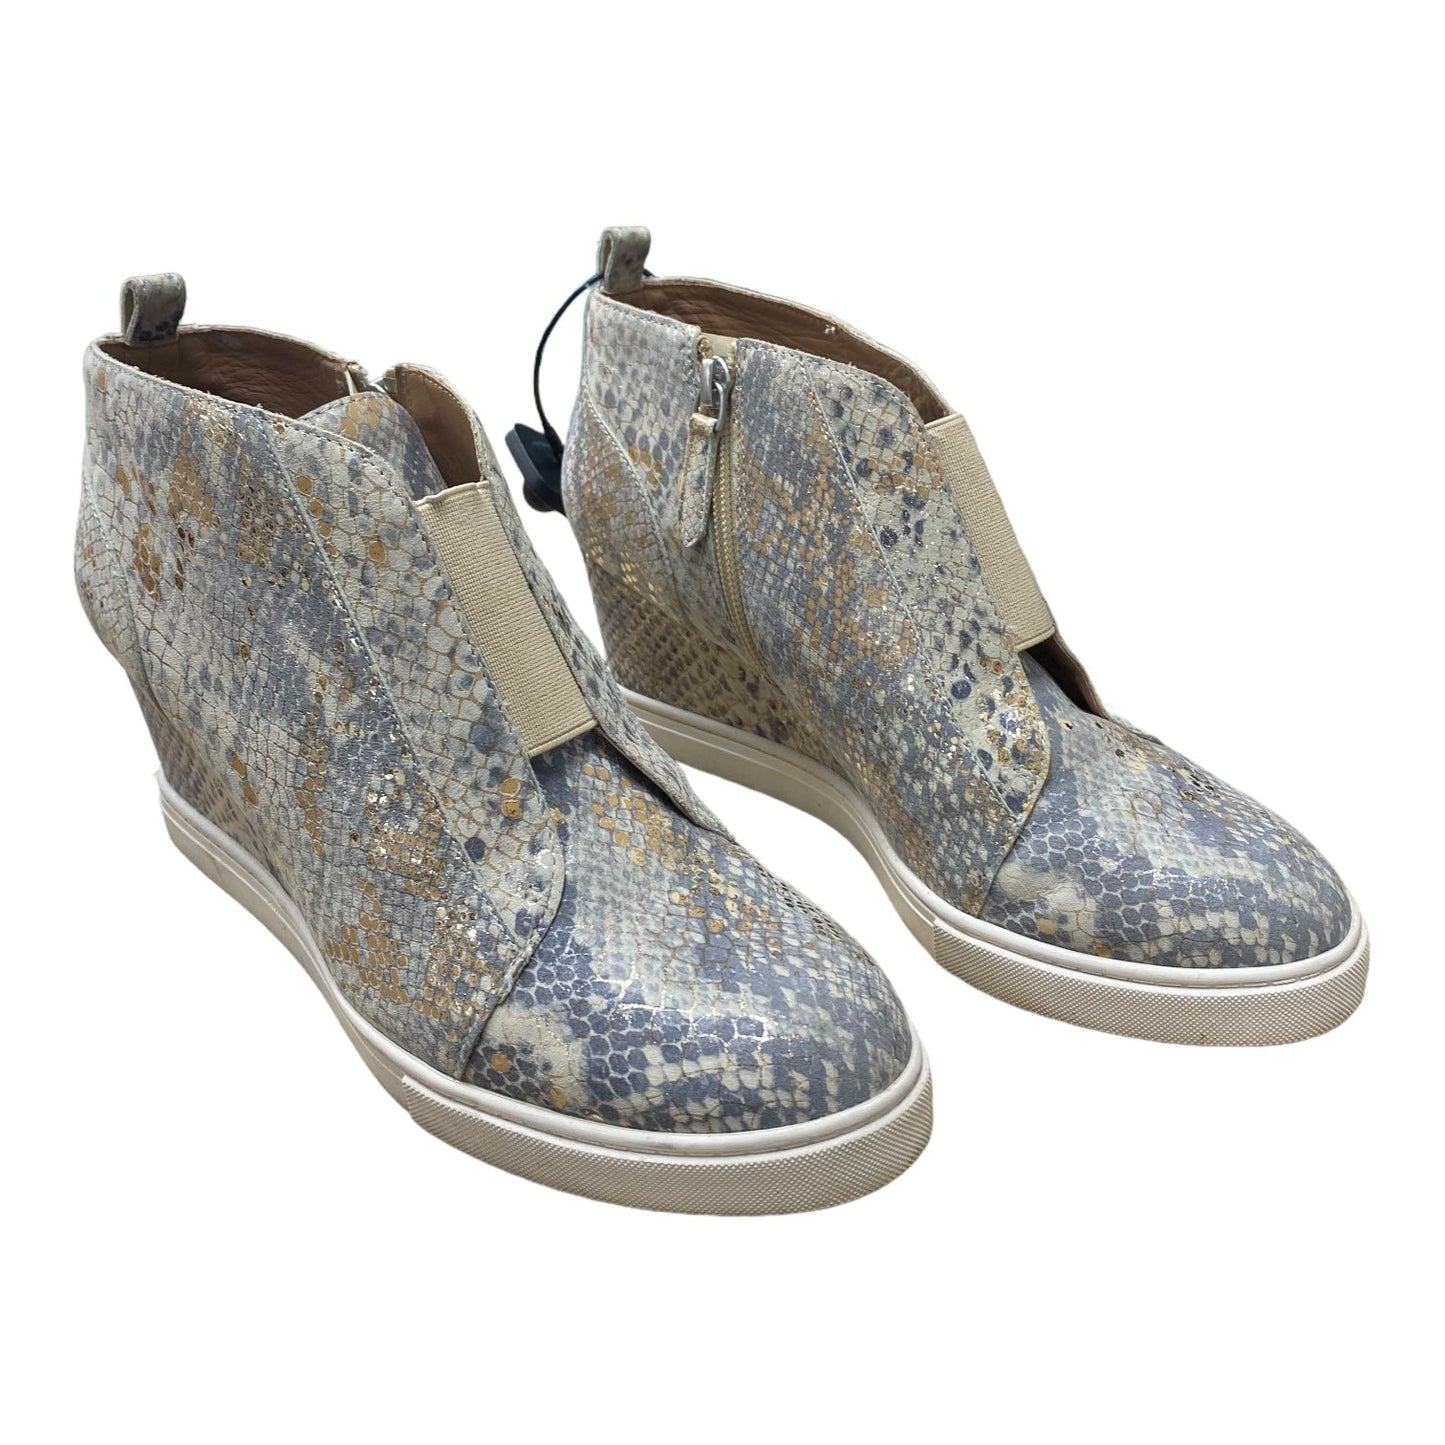 Snakeskin Print Shoes Sneakers Linea Paolo, Size 8